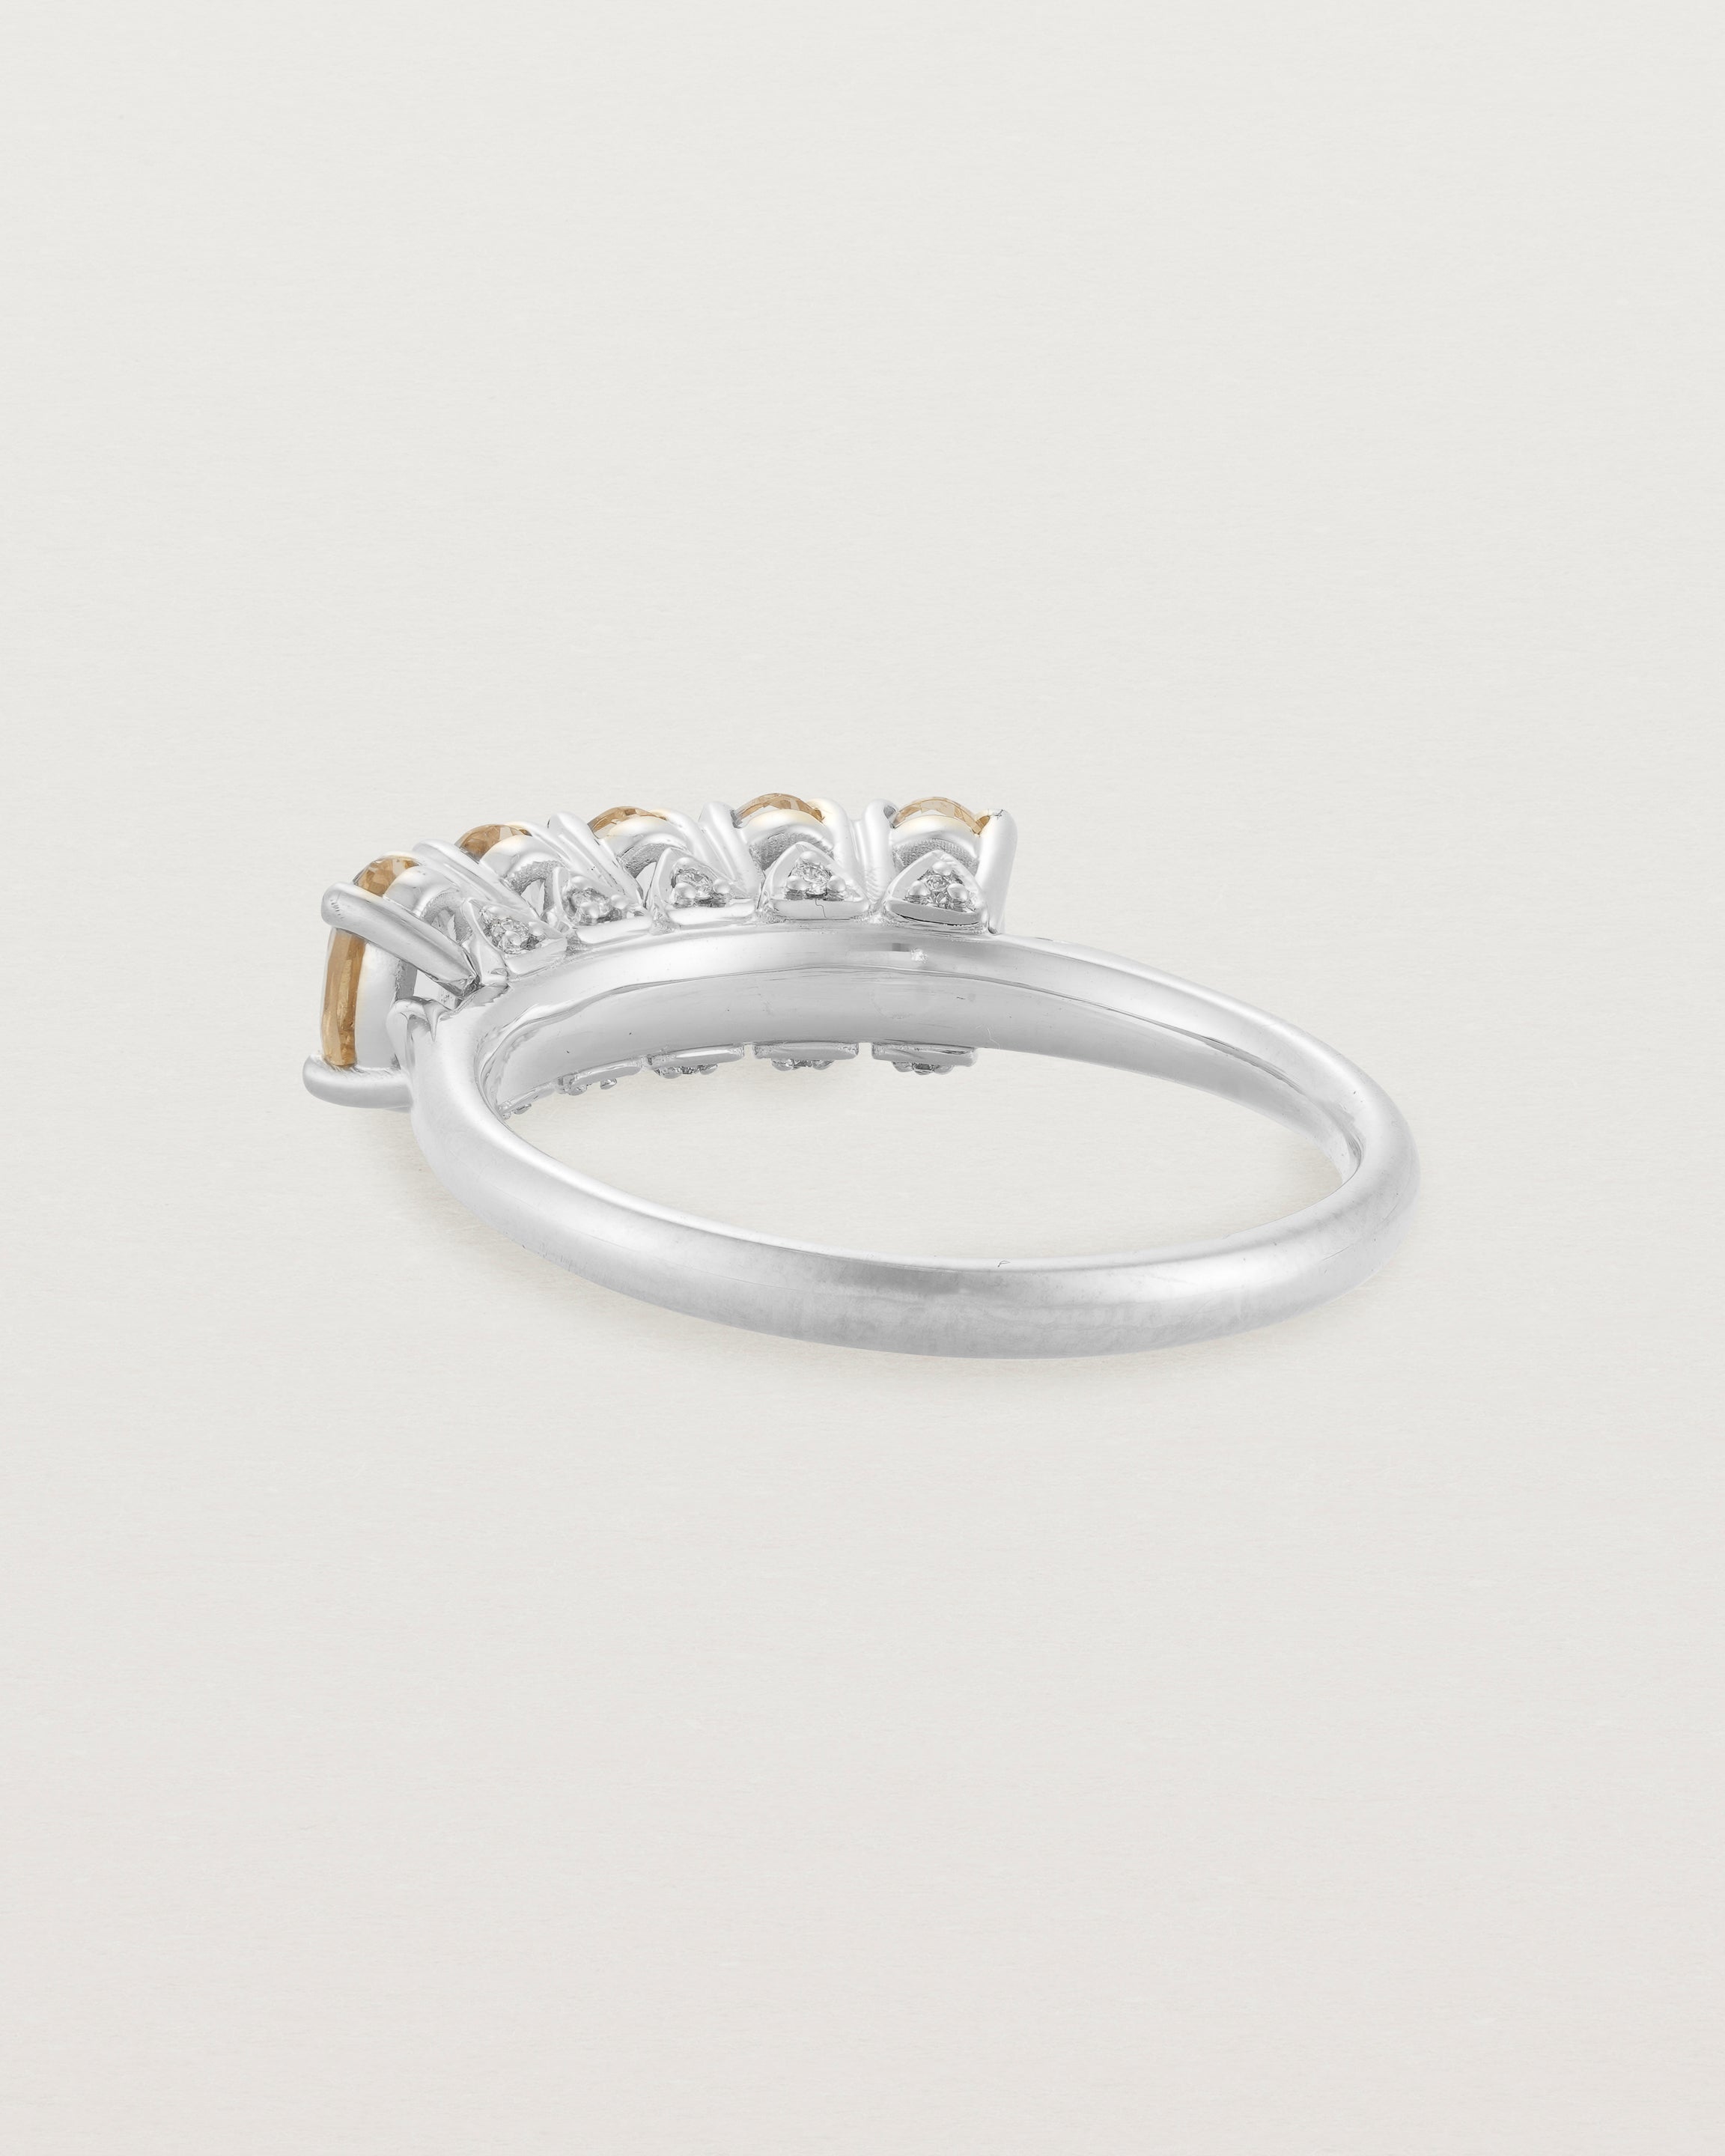 Back view of the Fiore Wrap Ring | Savannah Sunstone | White Gold.